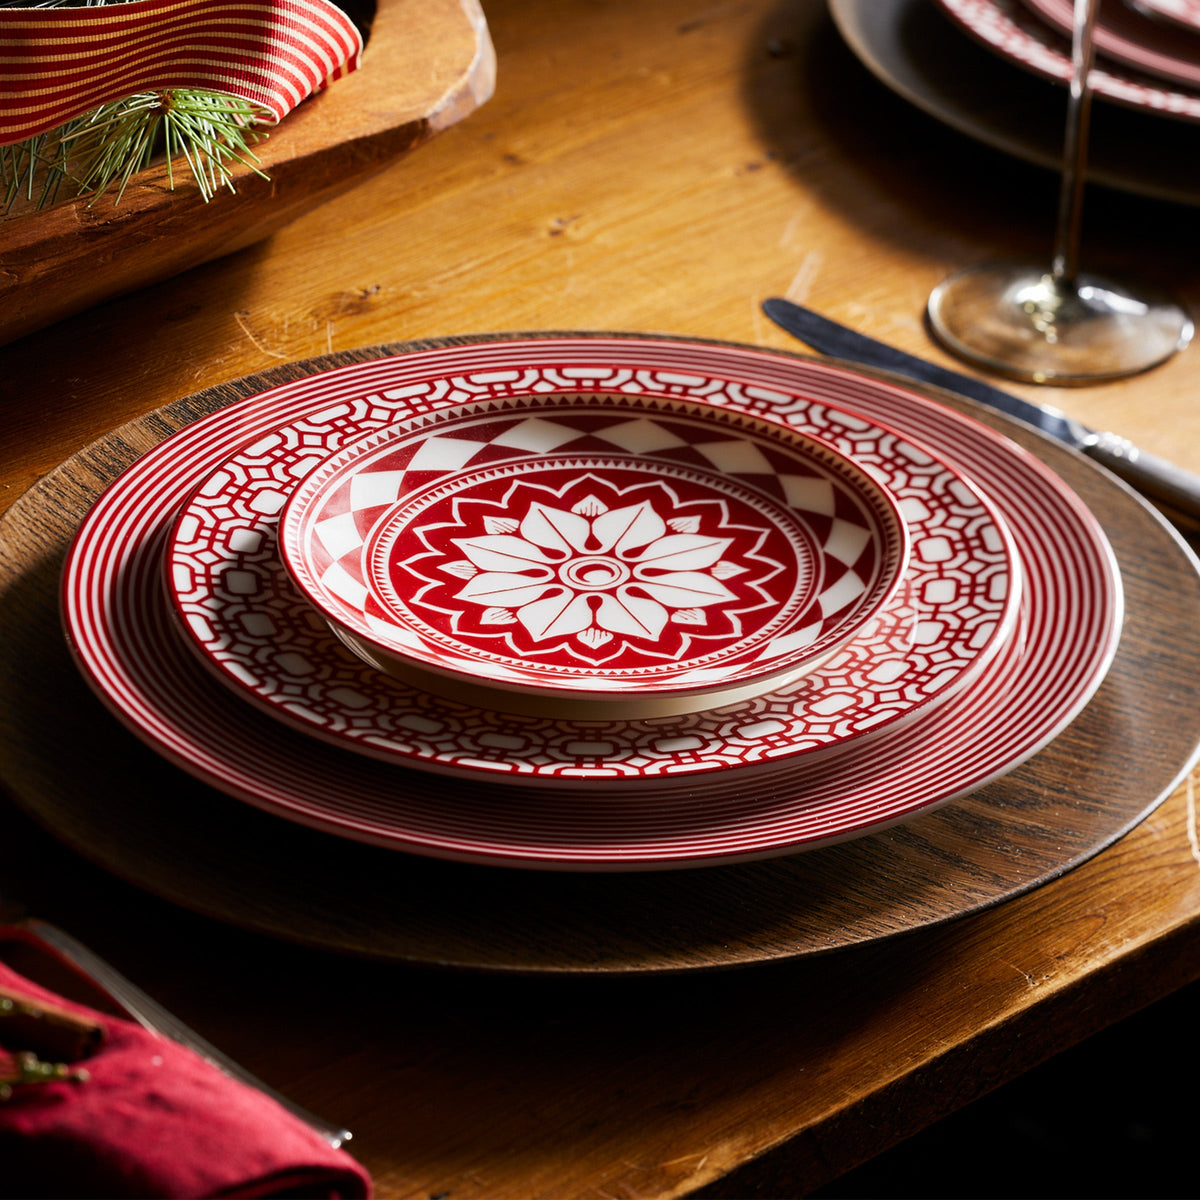 A Caskata Artisanal Home crimson and white plate on a wooden table featuring premium porcelain dinnerware with the Newport Stripe Crimson Dinner Plate pattern.